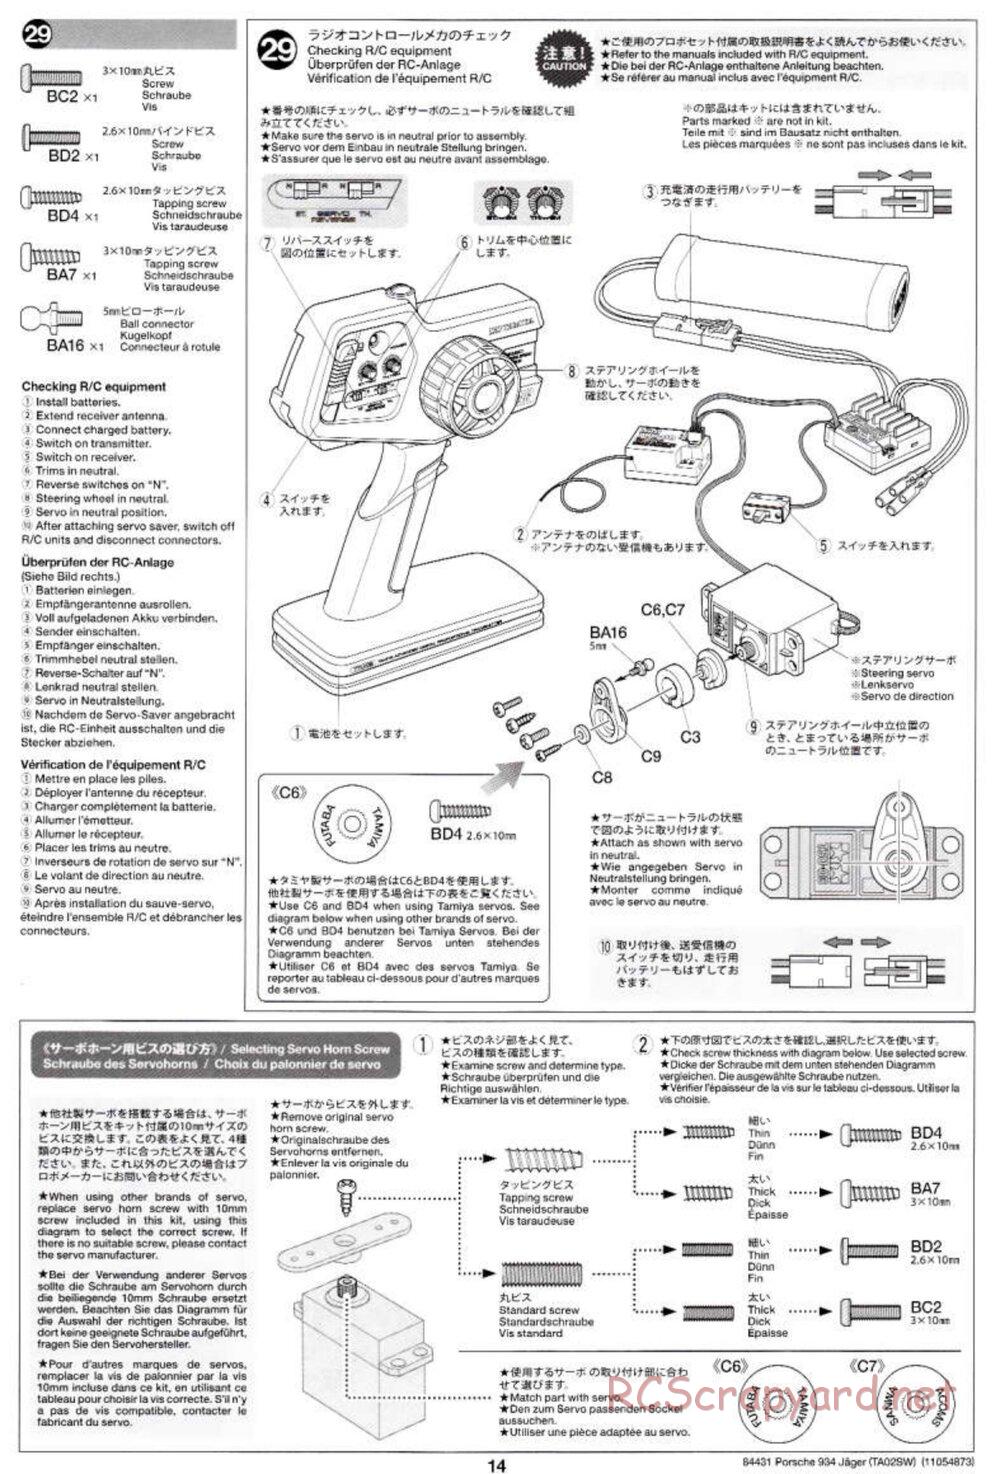 Tamiya - Porsche Turbo RSR Type 934 Jagermeister - TA-02SW Chassis - Manual - Page 14